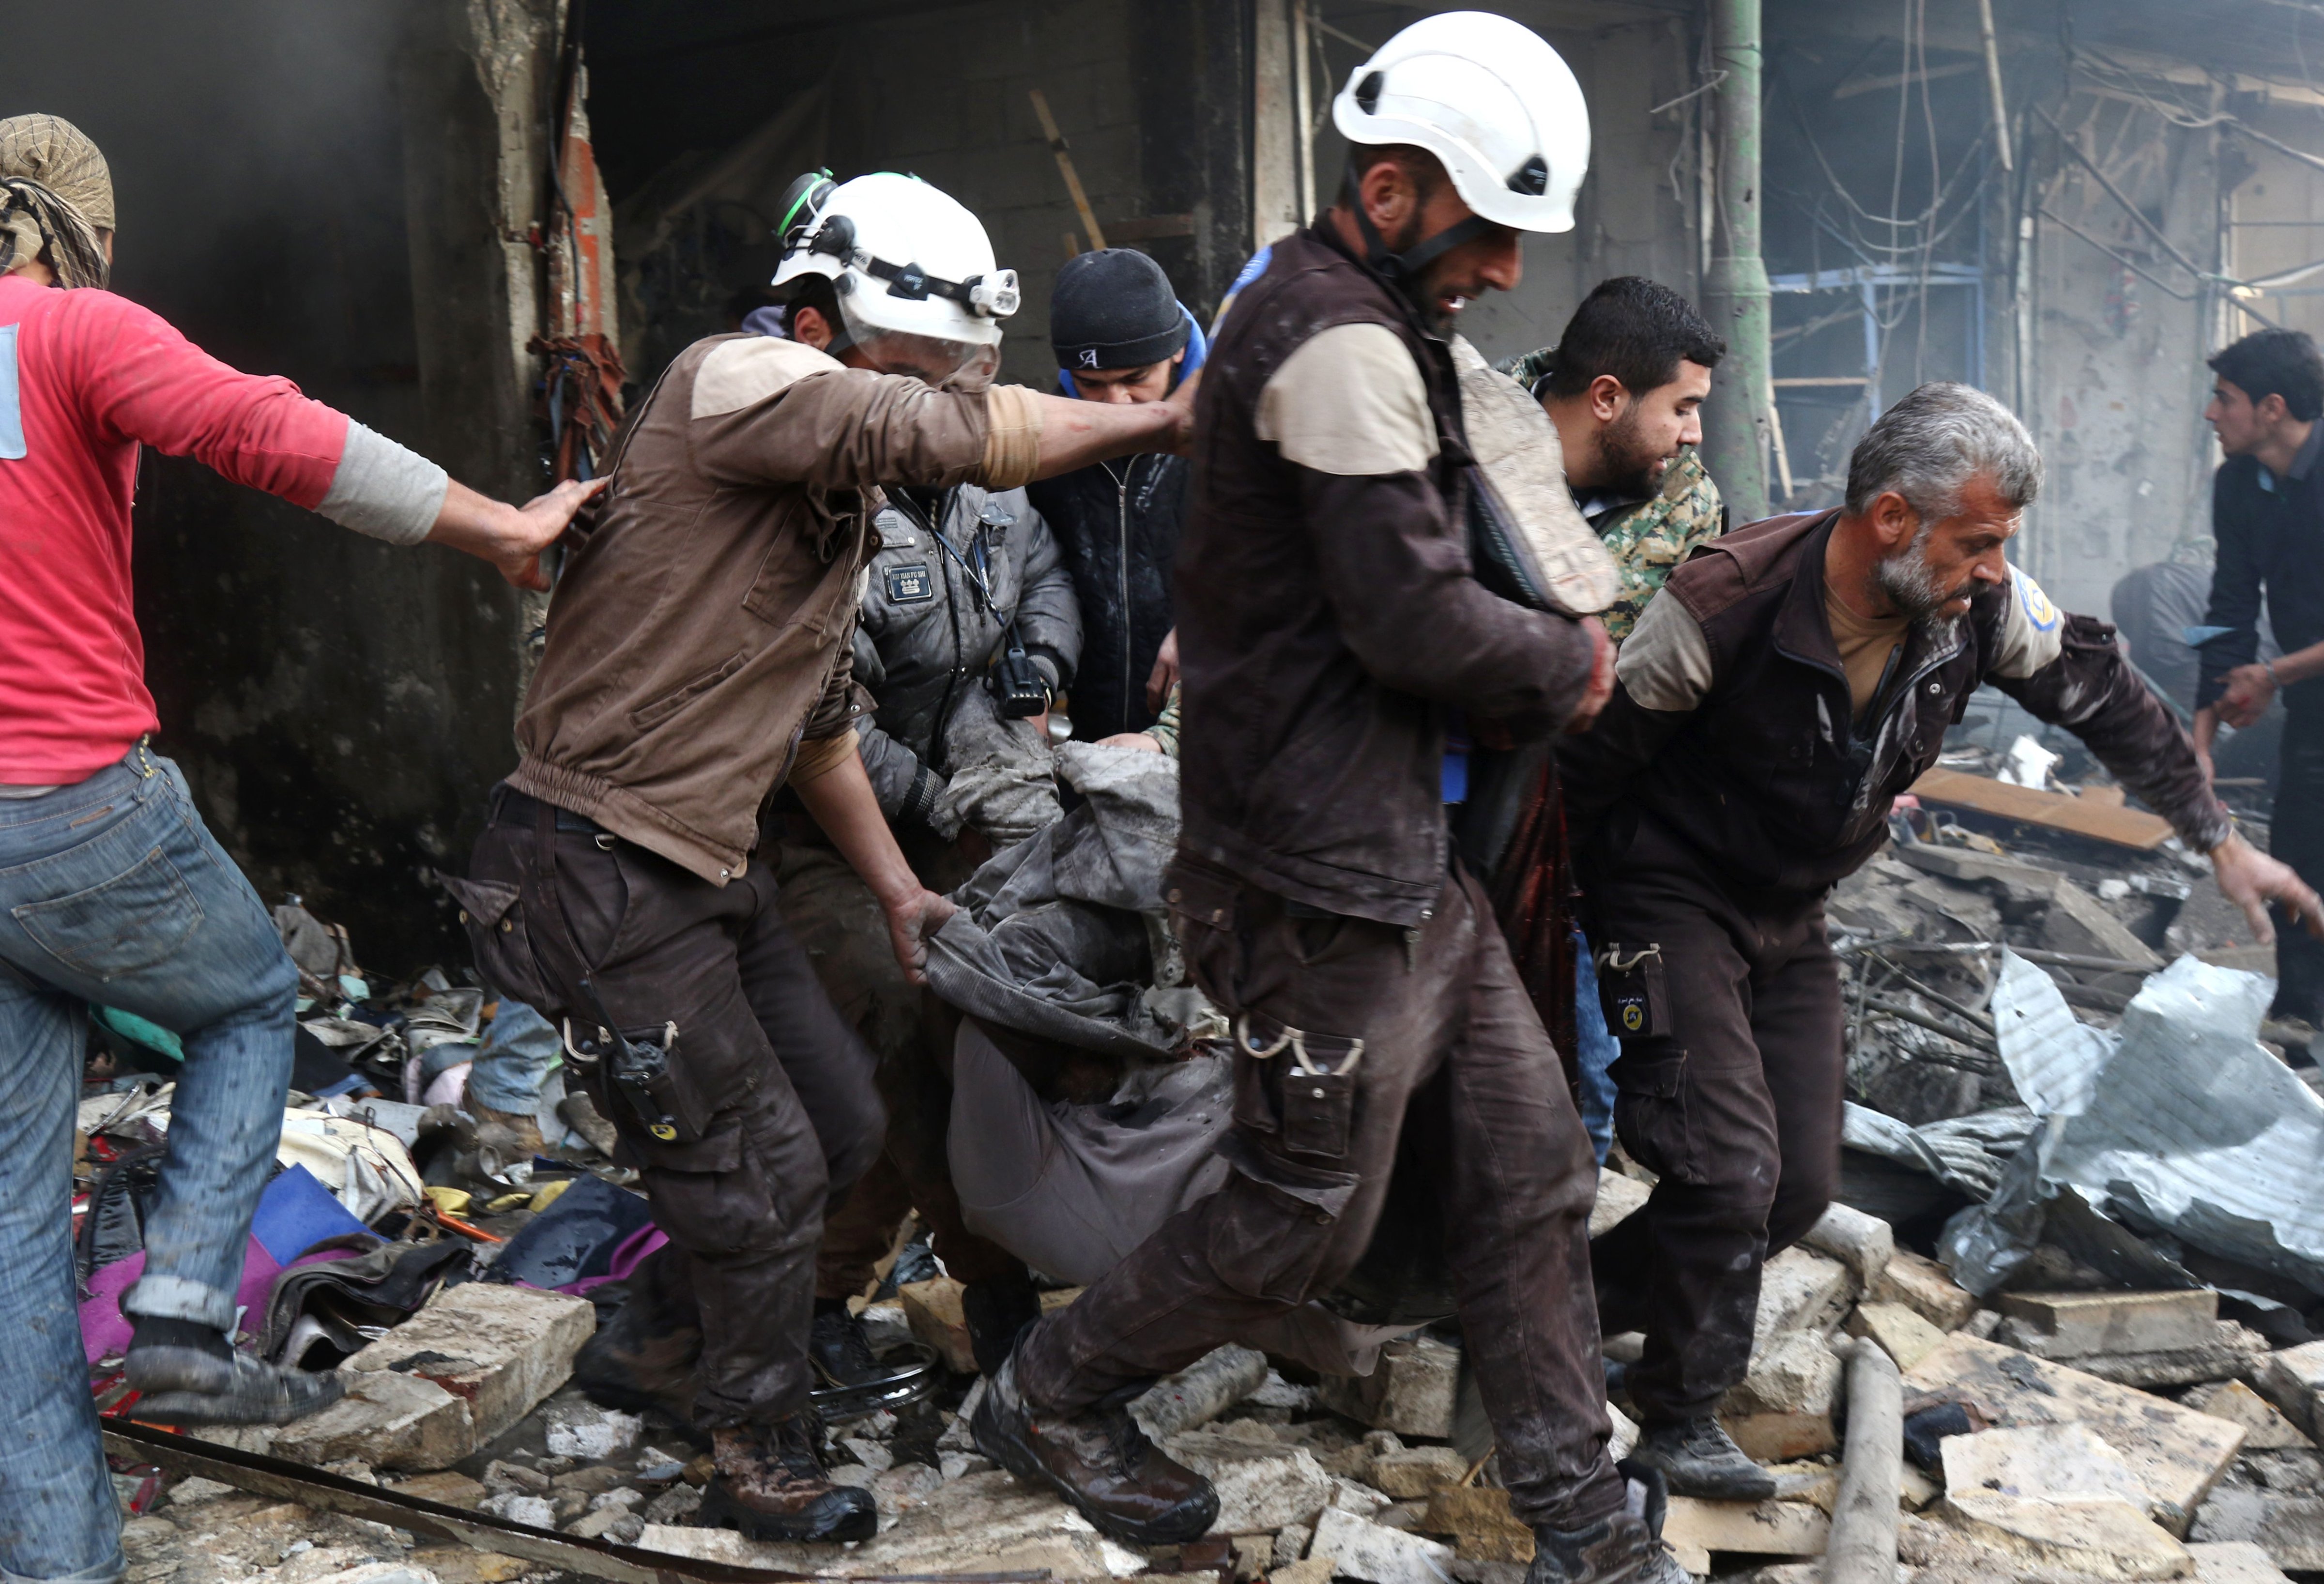 Syrian Civil Defence volunteers, also known as the White Helmets, evacuate a victim from a building following an air strike on the village of Maaret al-Numan, in the country's northern province of Idlib, on Dec. 4, 2016. (Mohamed Al-Bakour&mdash;AFP/Getty Images)